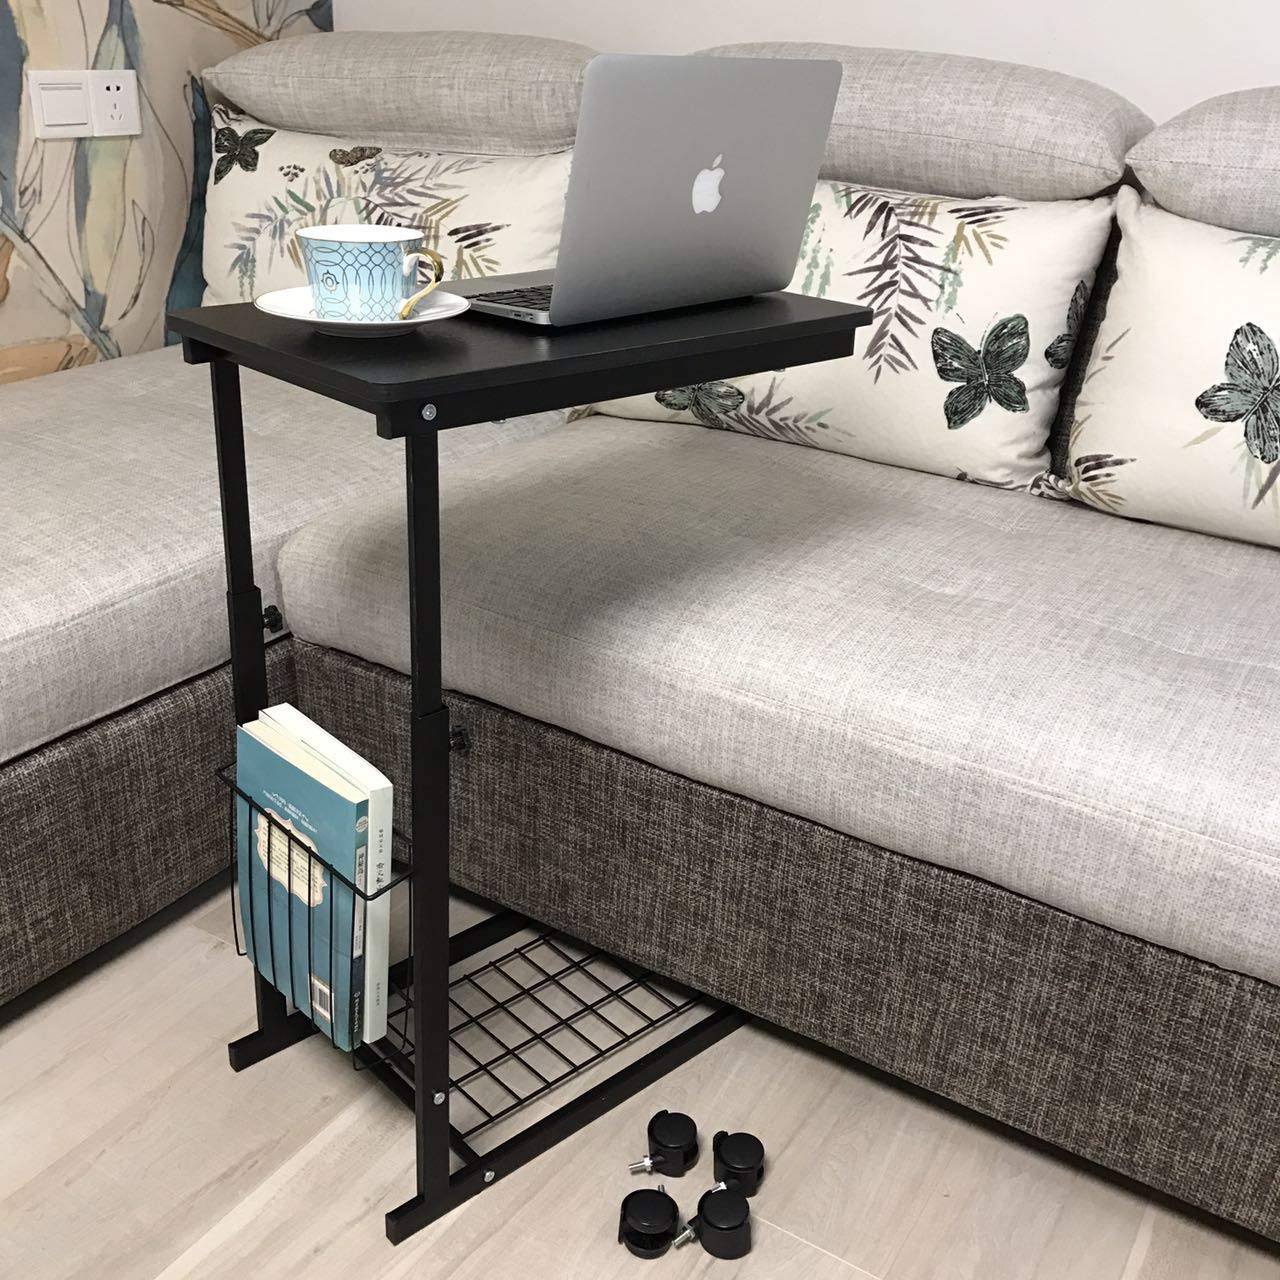 micoe height adjustable with wheels sofa side table extra tall accent slide under console storage for entryway hallway kitchen dining cabinets antique corner lamps nest tables